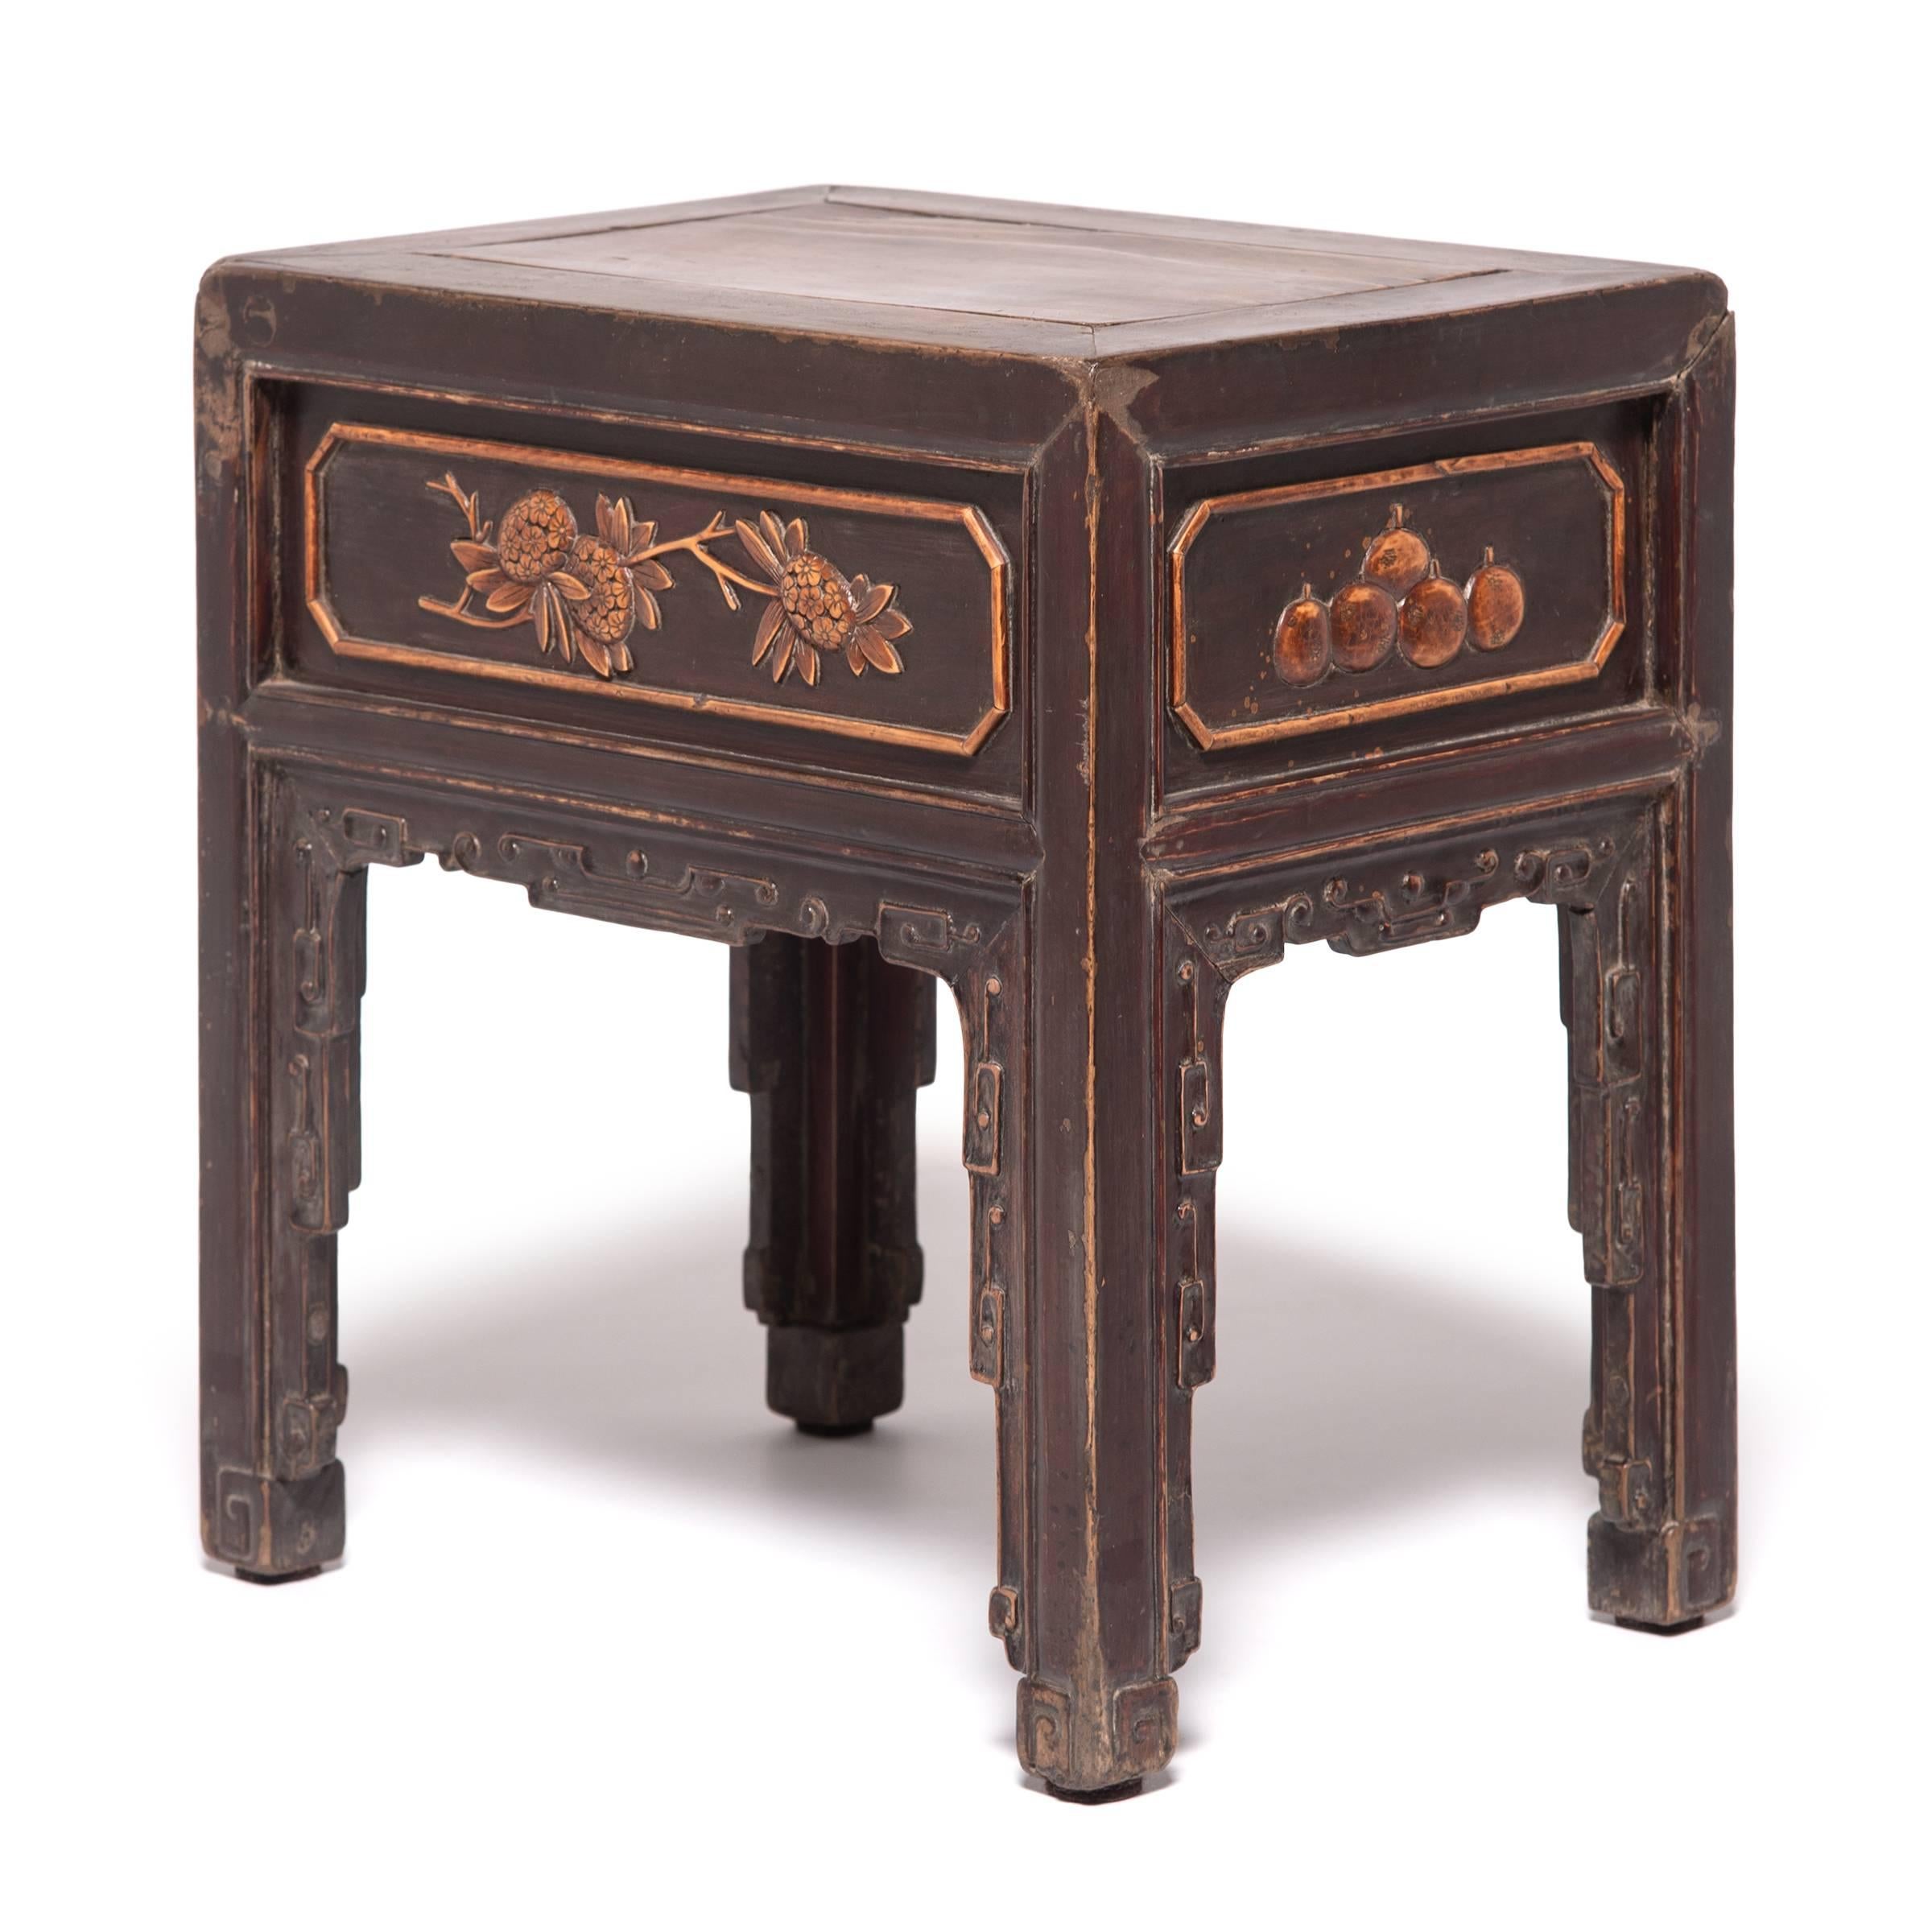 Created by a Qing dynasty artisan over 150 years ago, this petite table with boxwood inlay of auspicious fruit and floral arrangements was likely used as a display stand for a figure or ceramic vase. Appreciated for its smooth texture and bright